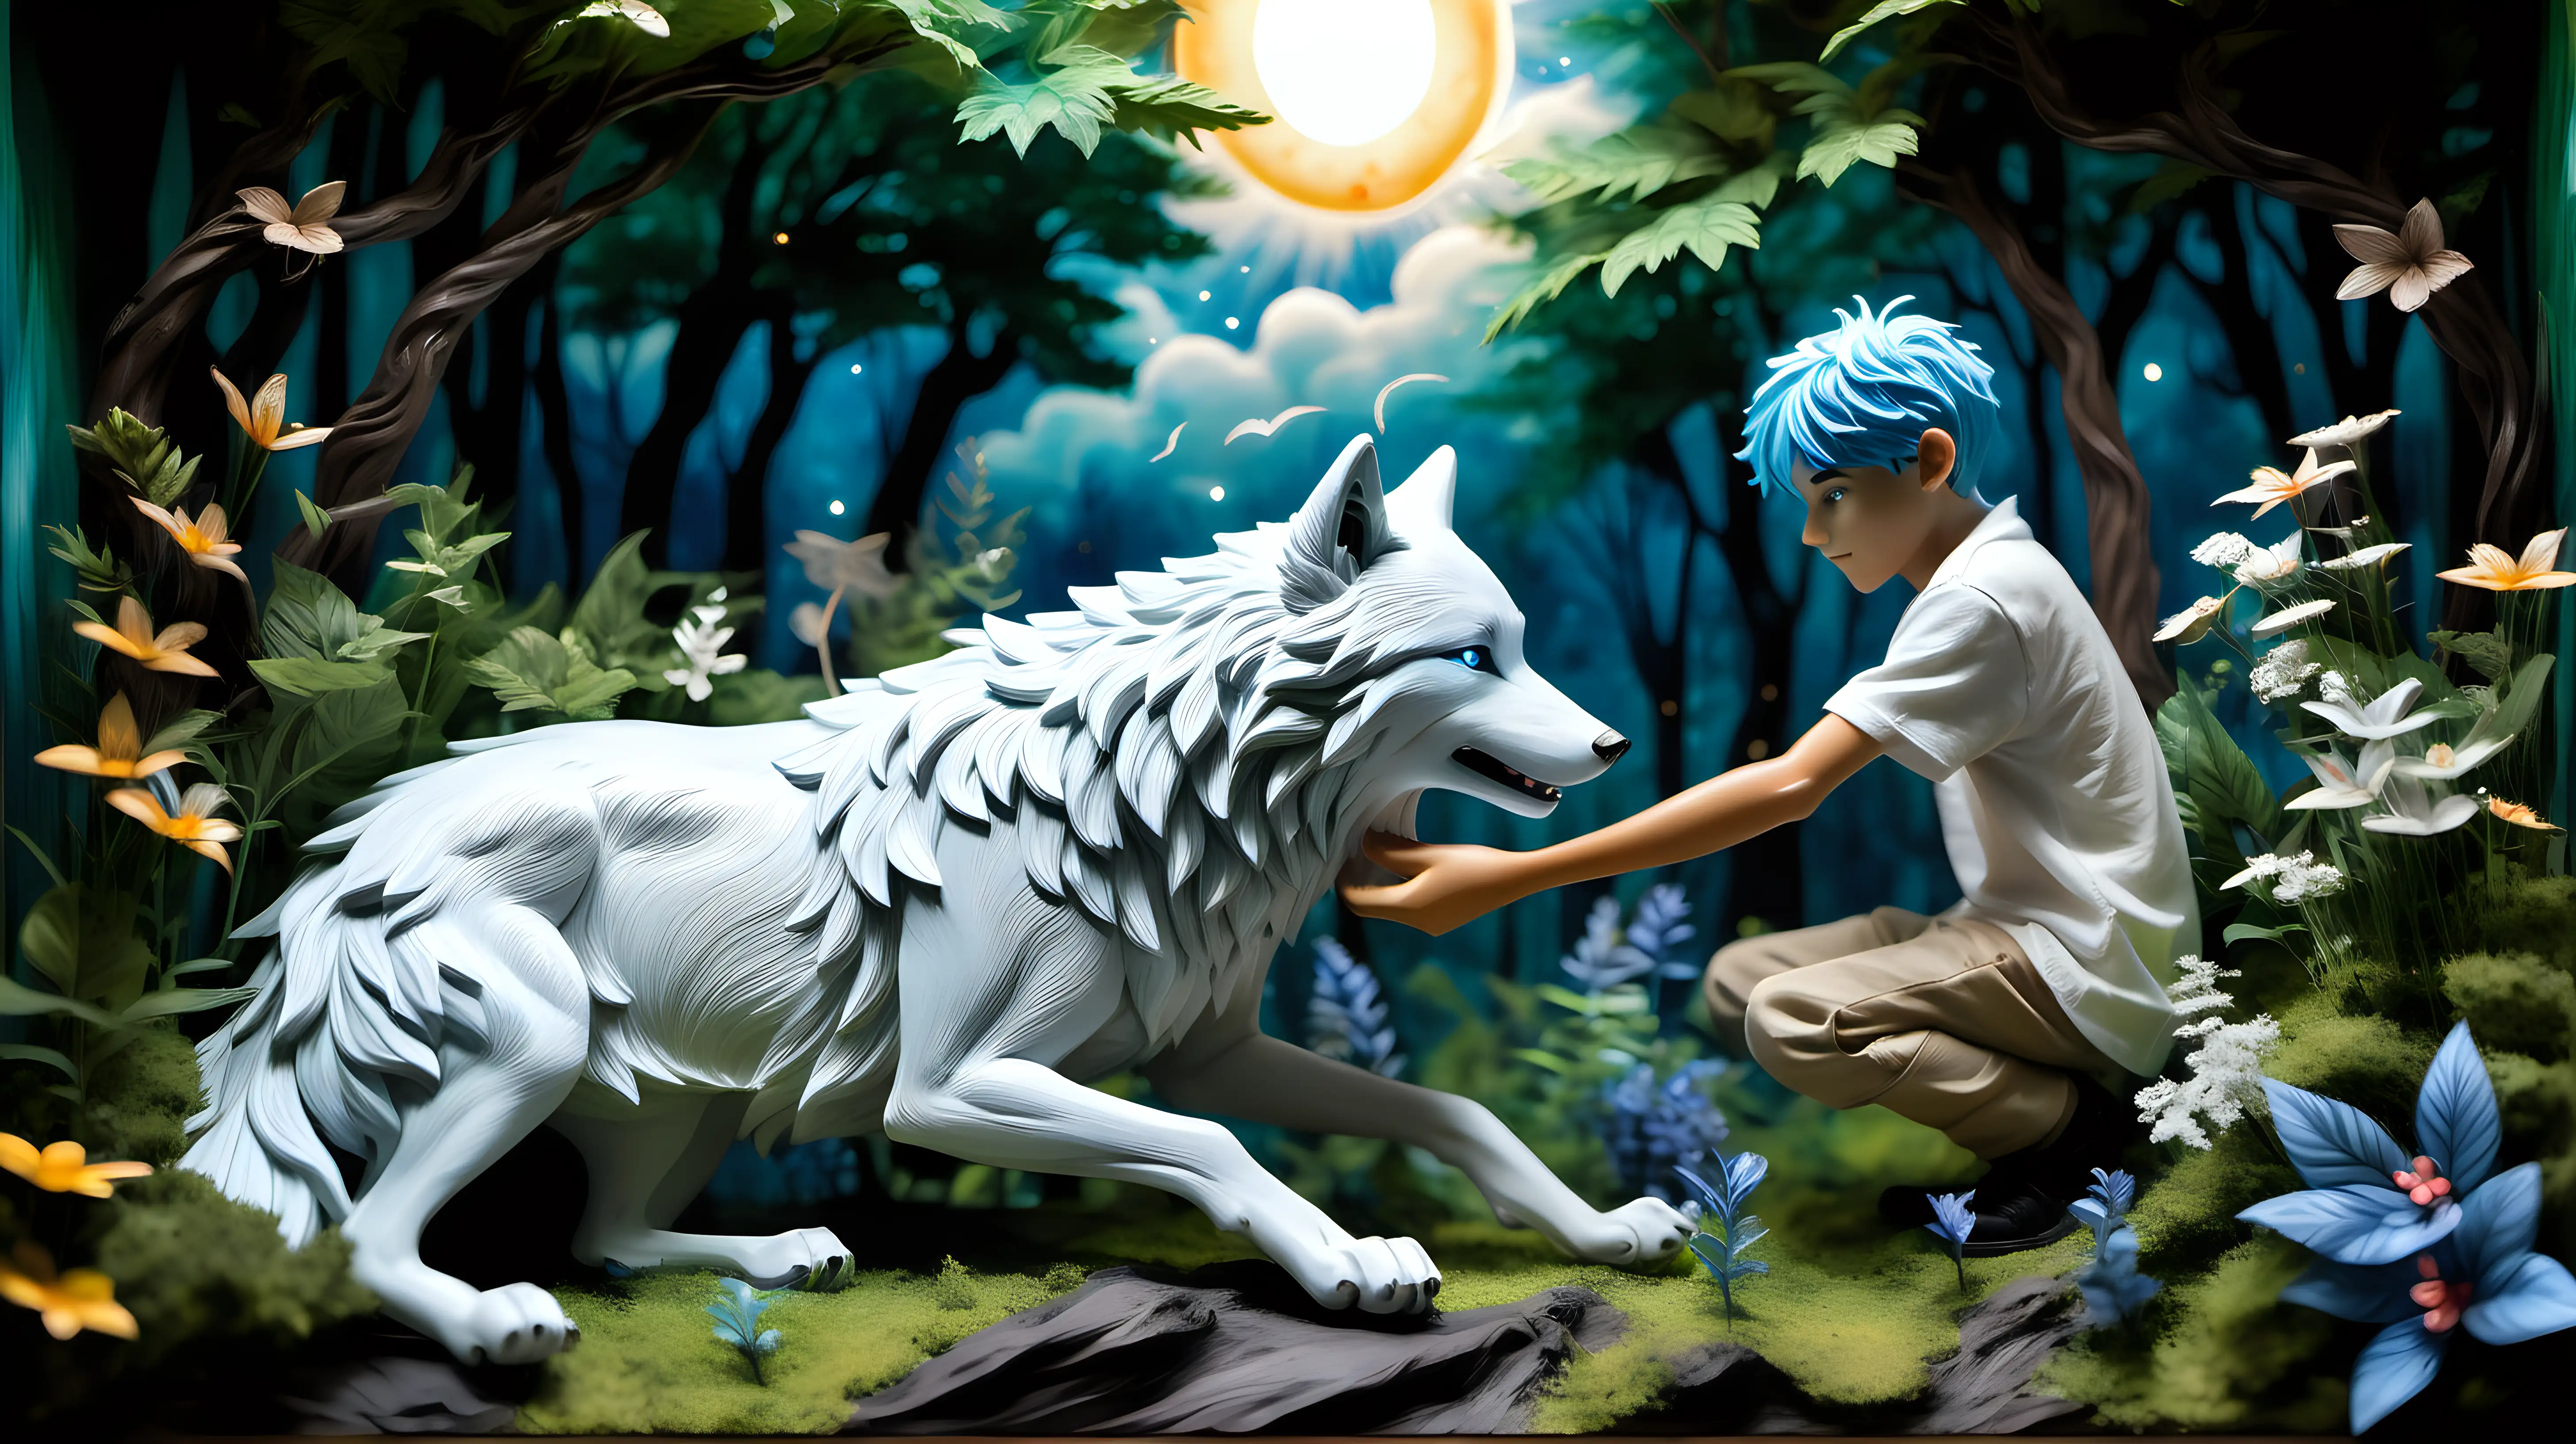 DIORAMA, ghibli inspired painting of a beautiful enchanting blue-haired, 18 YEAR OLD boy, playing with a big white wolf in an enchanted forest, surrounded by greenery, flowers, fireflies, clouds and sunshine